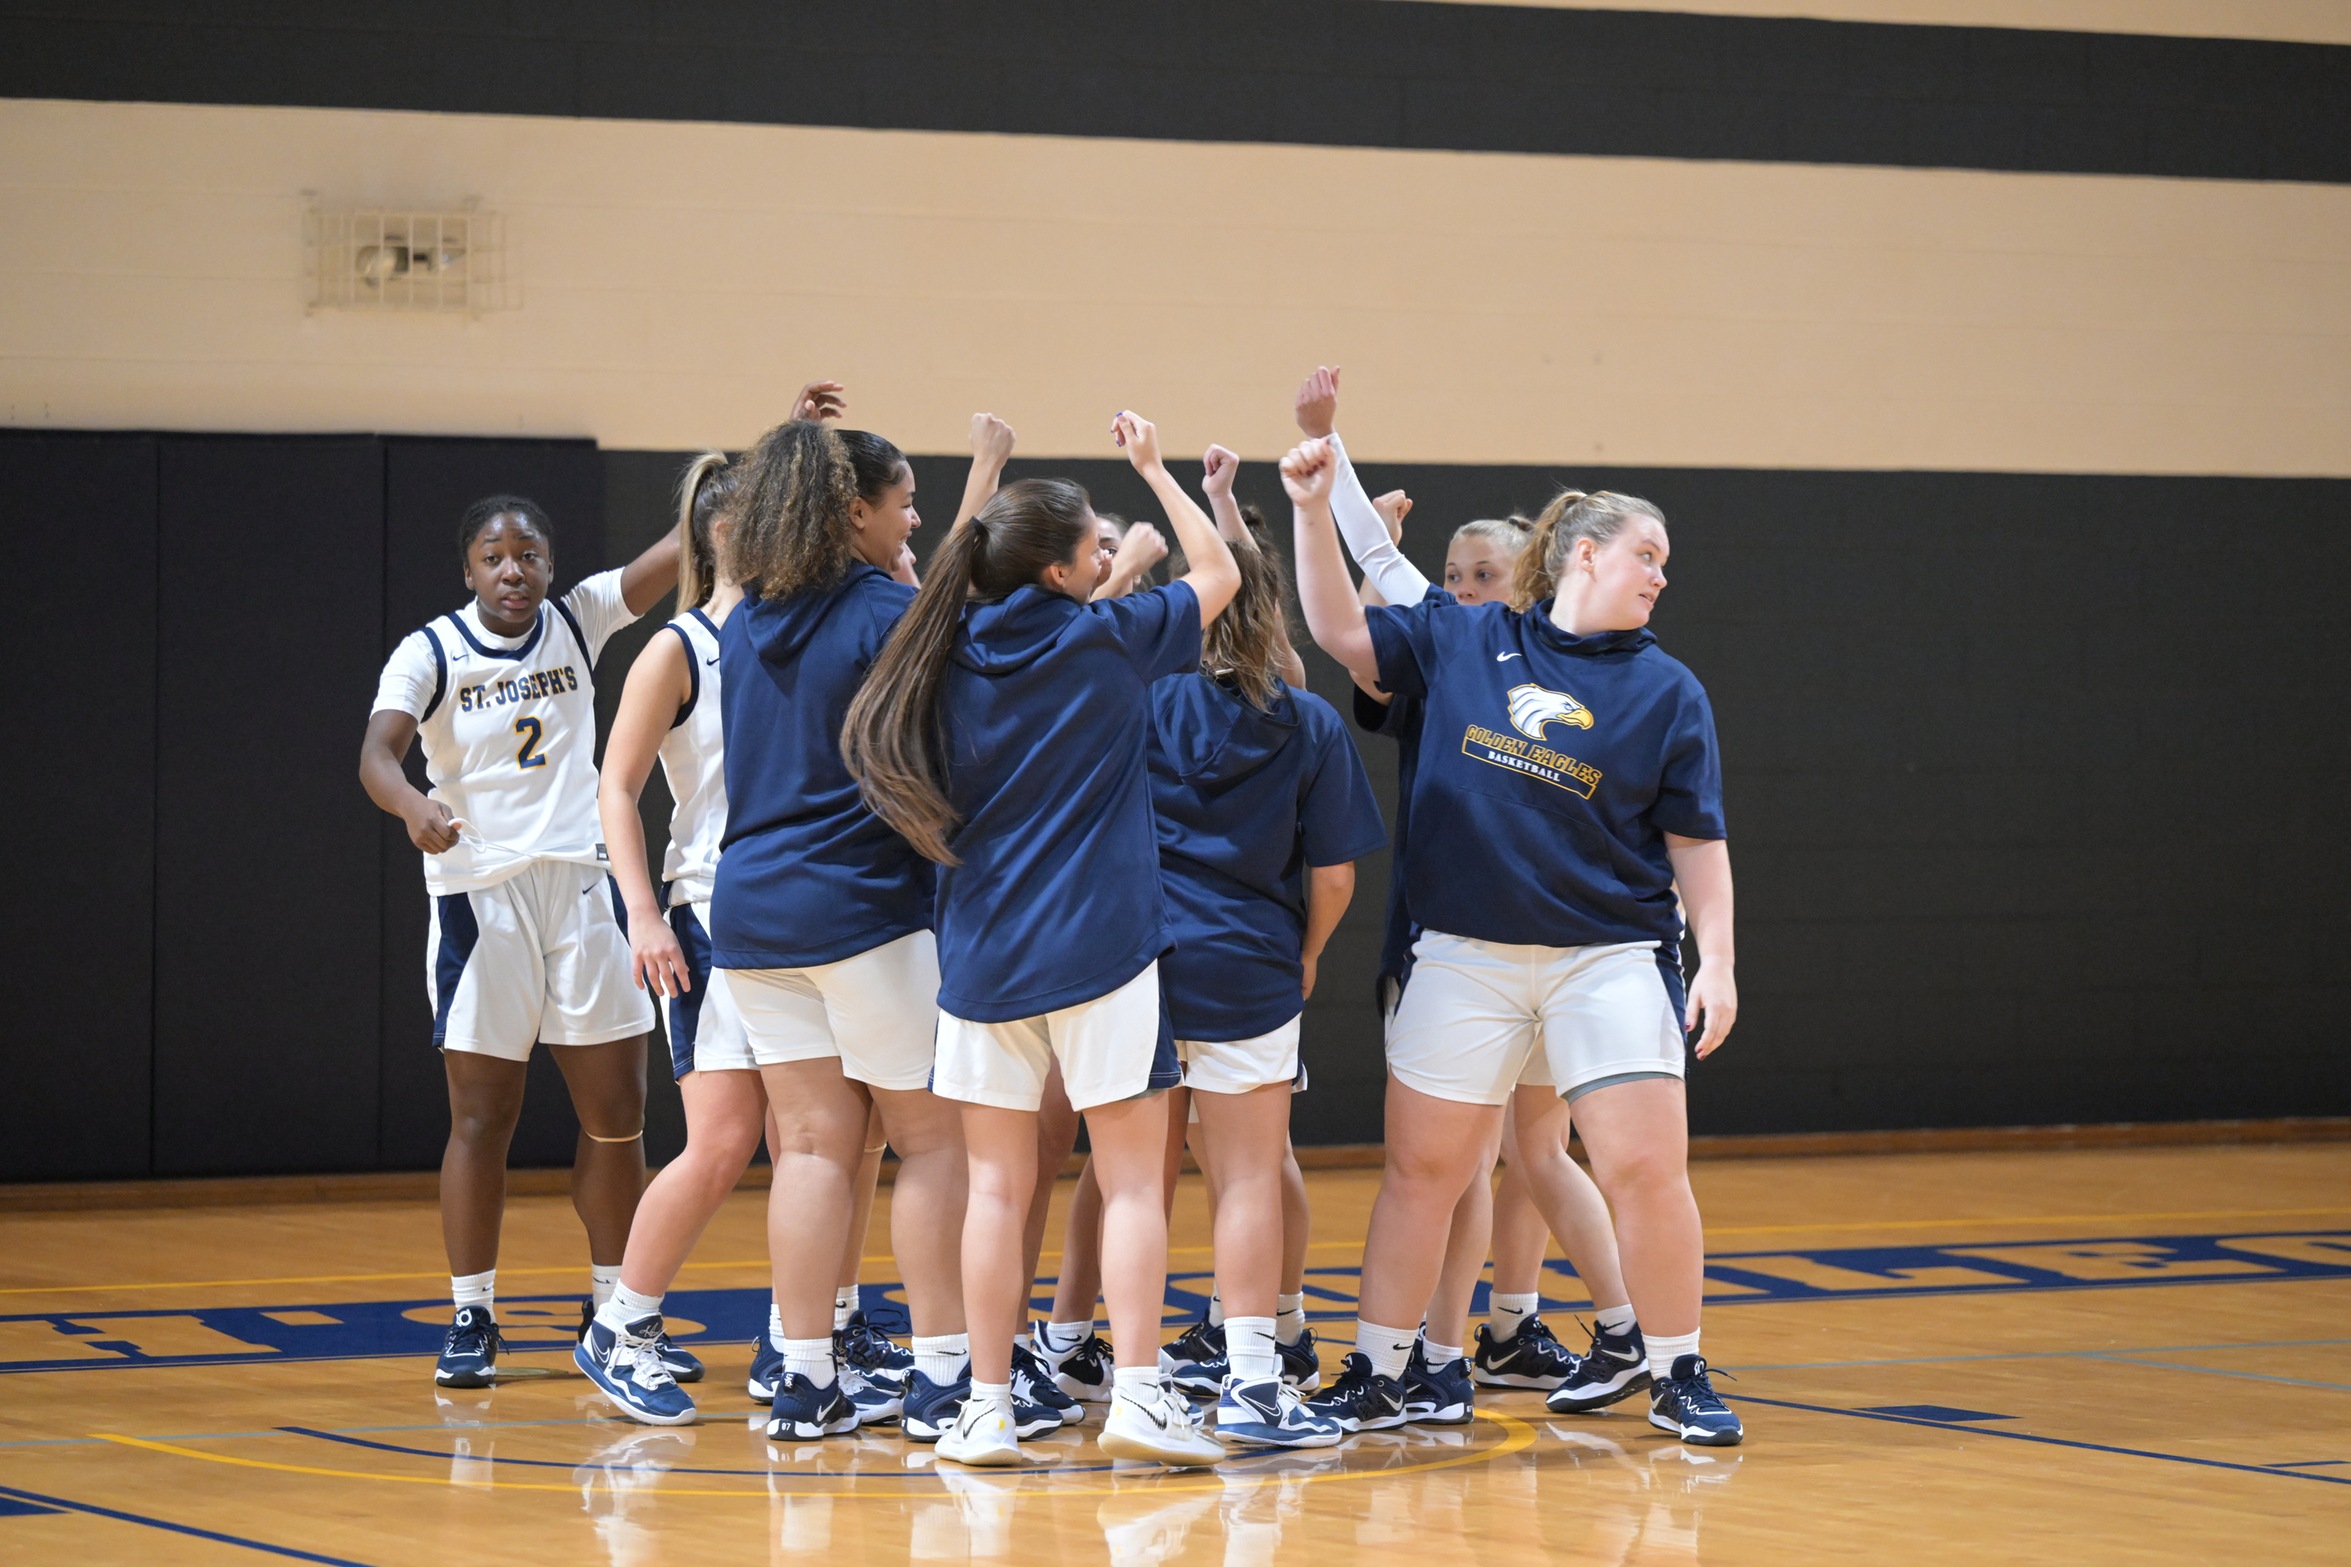 Women's Basketball Season Ends in Semifinals to USMMA, 82-56